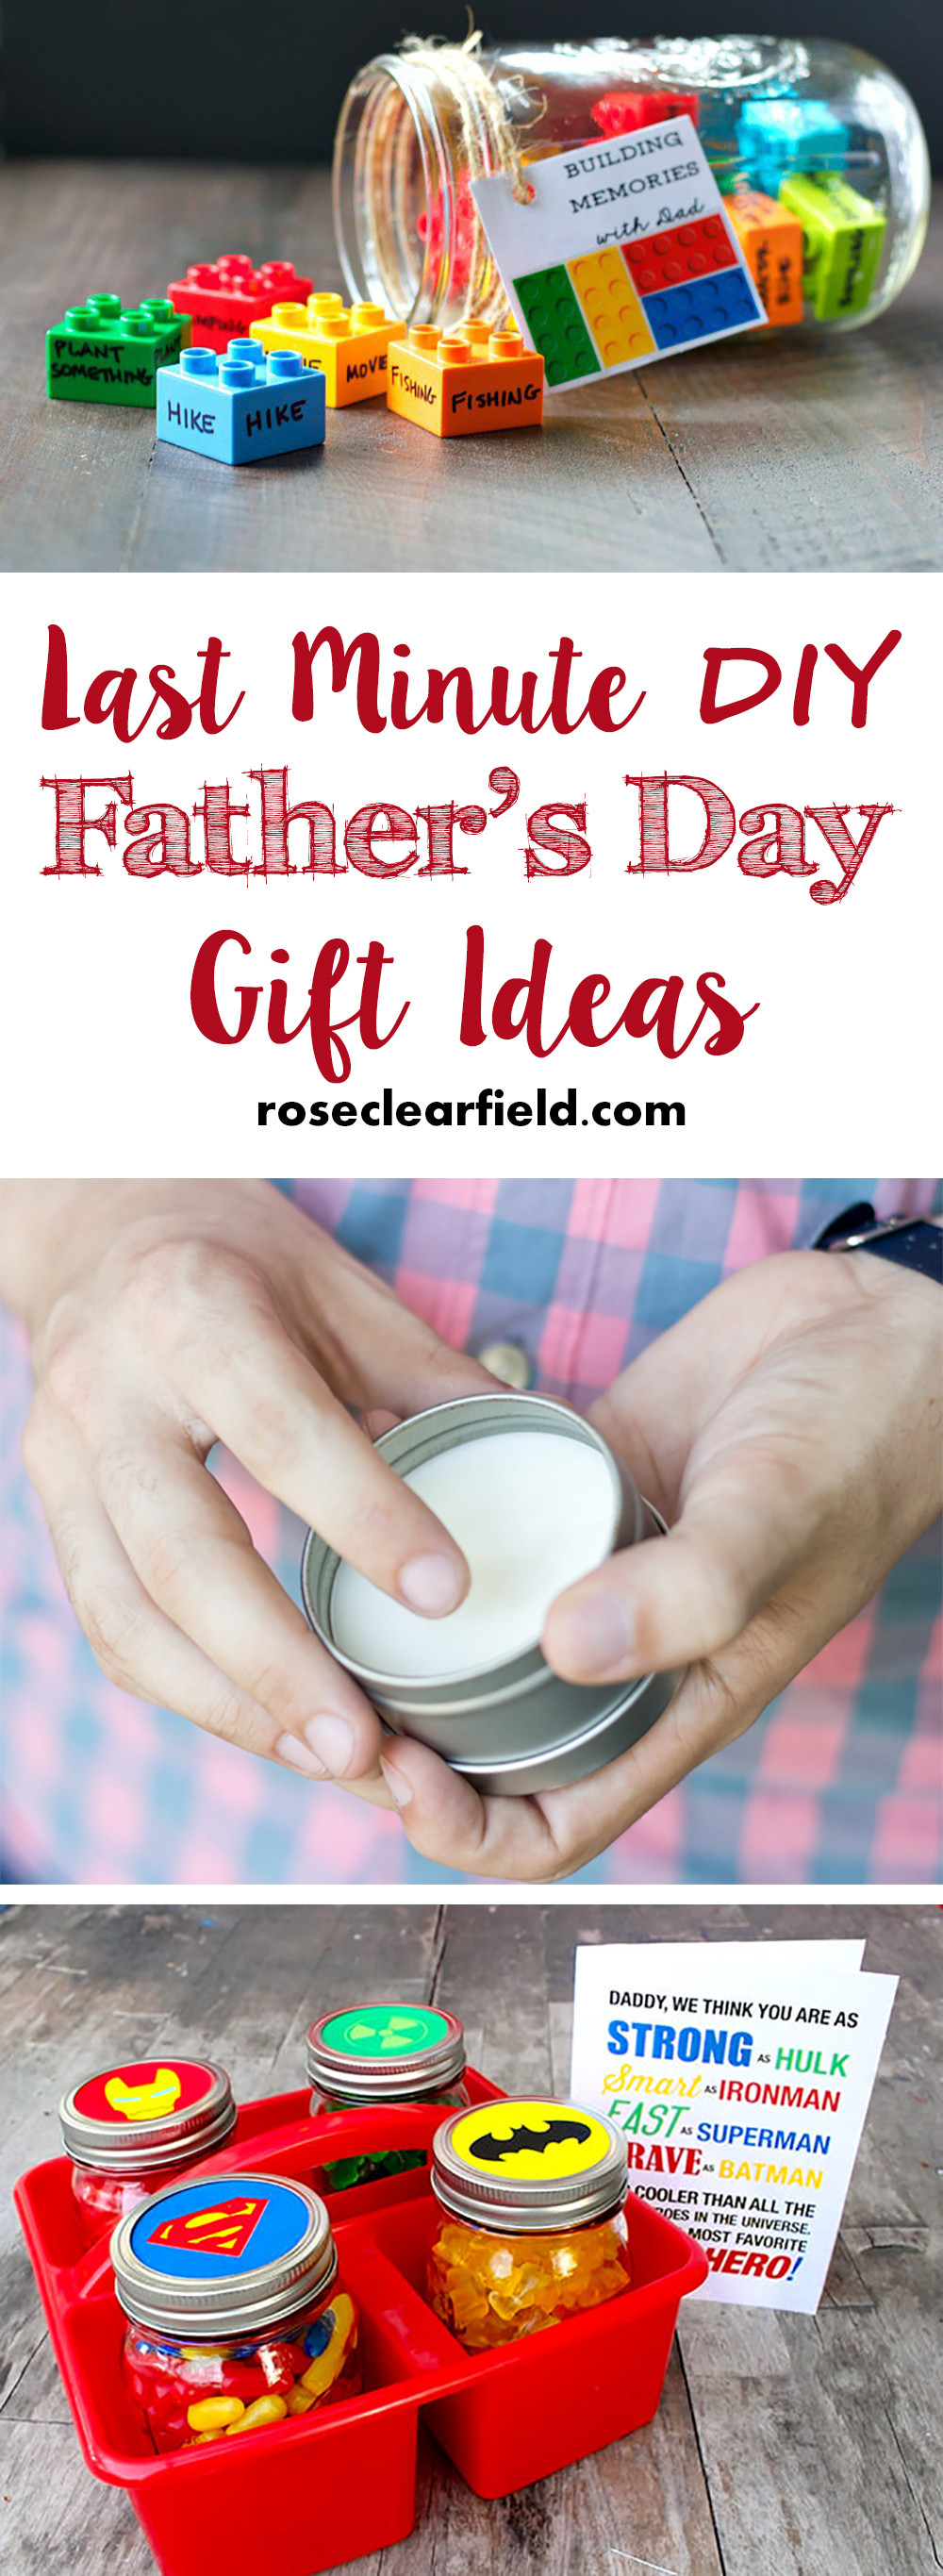 Father'S Day Diy Gift Ideas
 Last Minute DIY Father s Day Gift Ideas • Rose Clearfield